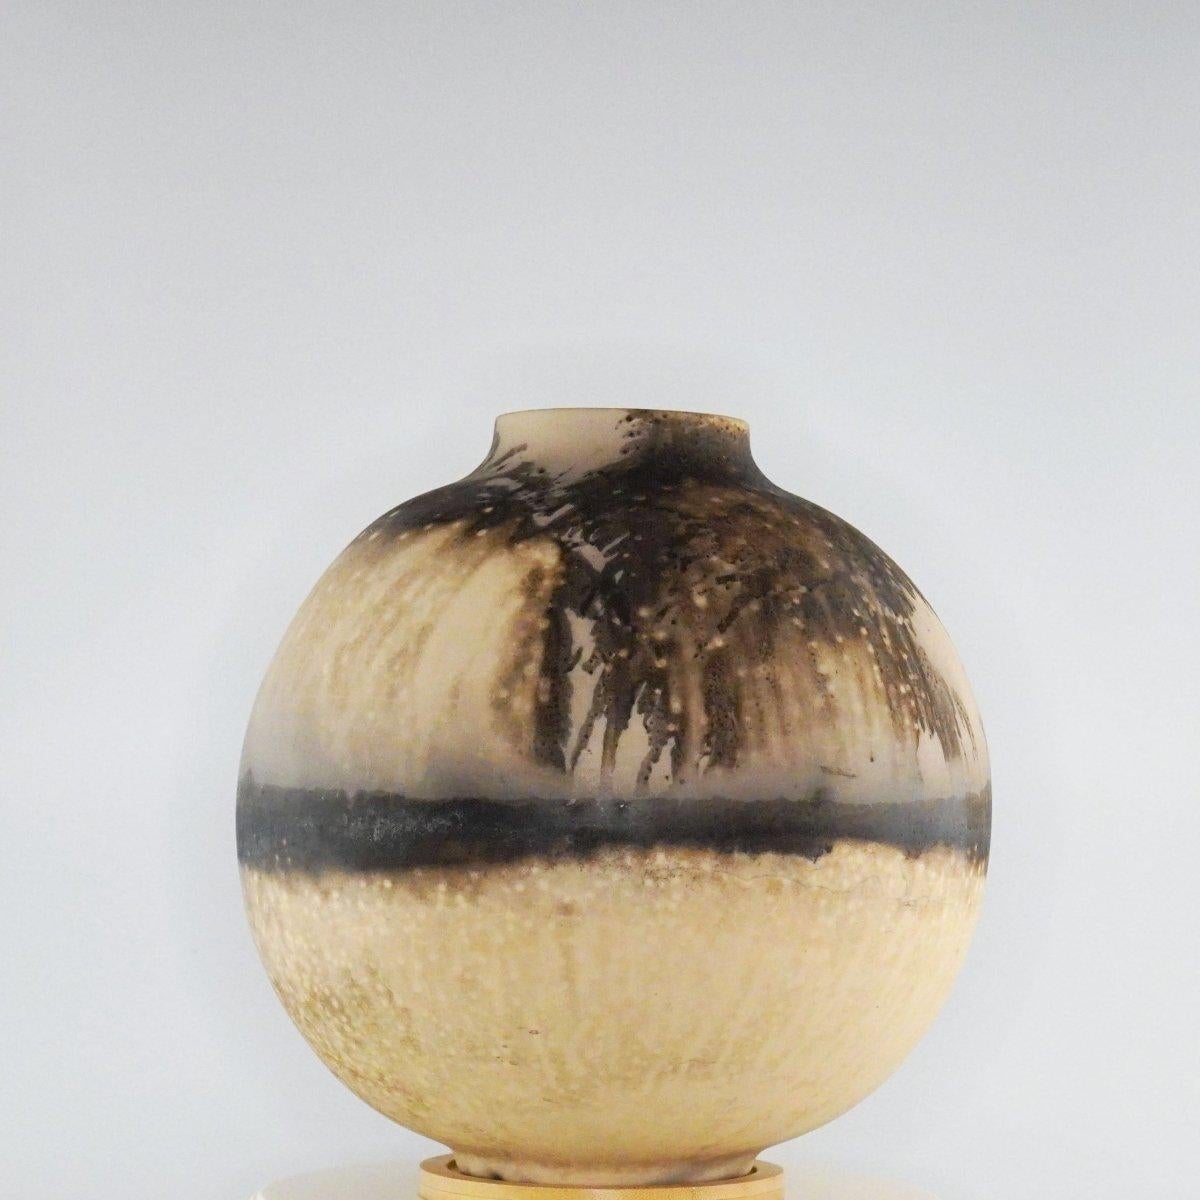 This Globe Vase is a round, capacious piece produced using the Raku technique, resulting in a beautiful unpredictable finish. This vase would be the perfect centerpiece or an addition to a growing collection of unique art in a home.

Obvara is a